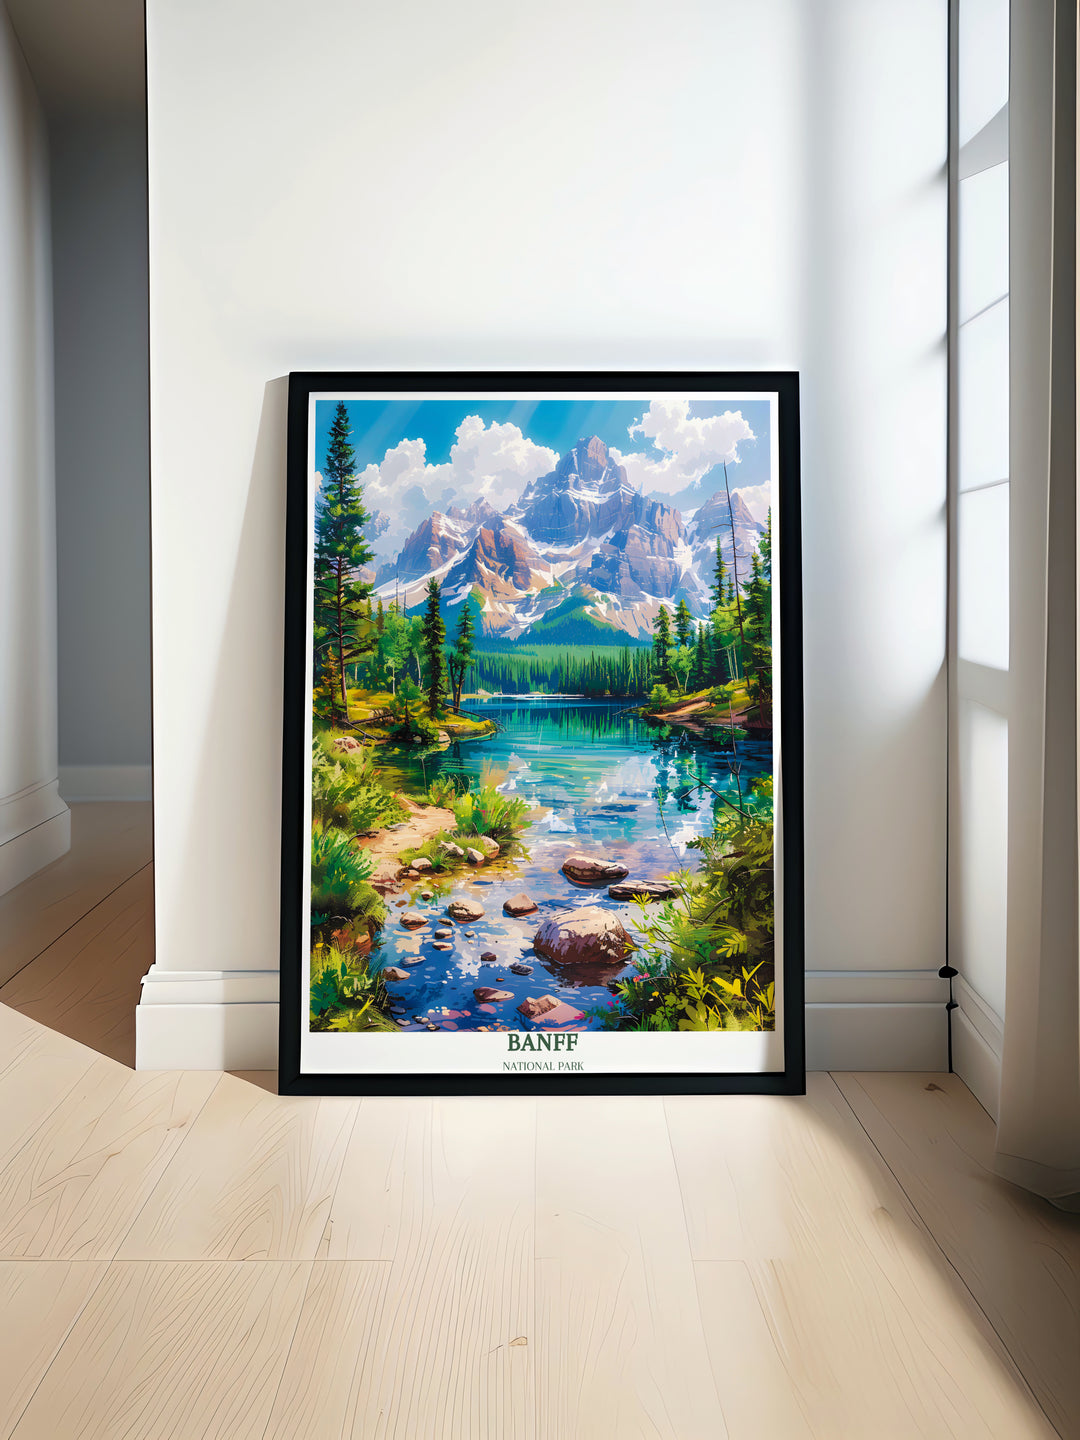 Transport yourself to the wilderness of Banff National Park with this captivating travel print, perfect for adding a touch of Canadas natural beauty to your walls.